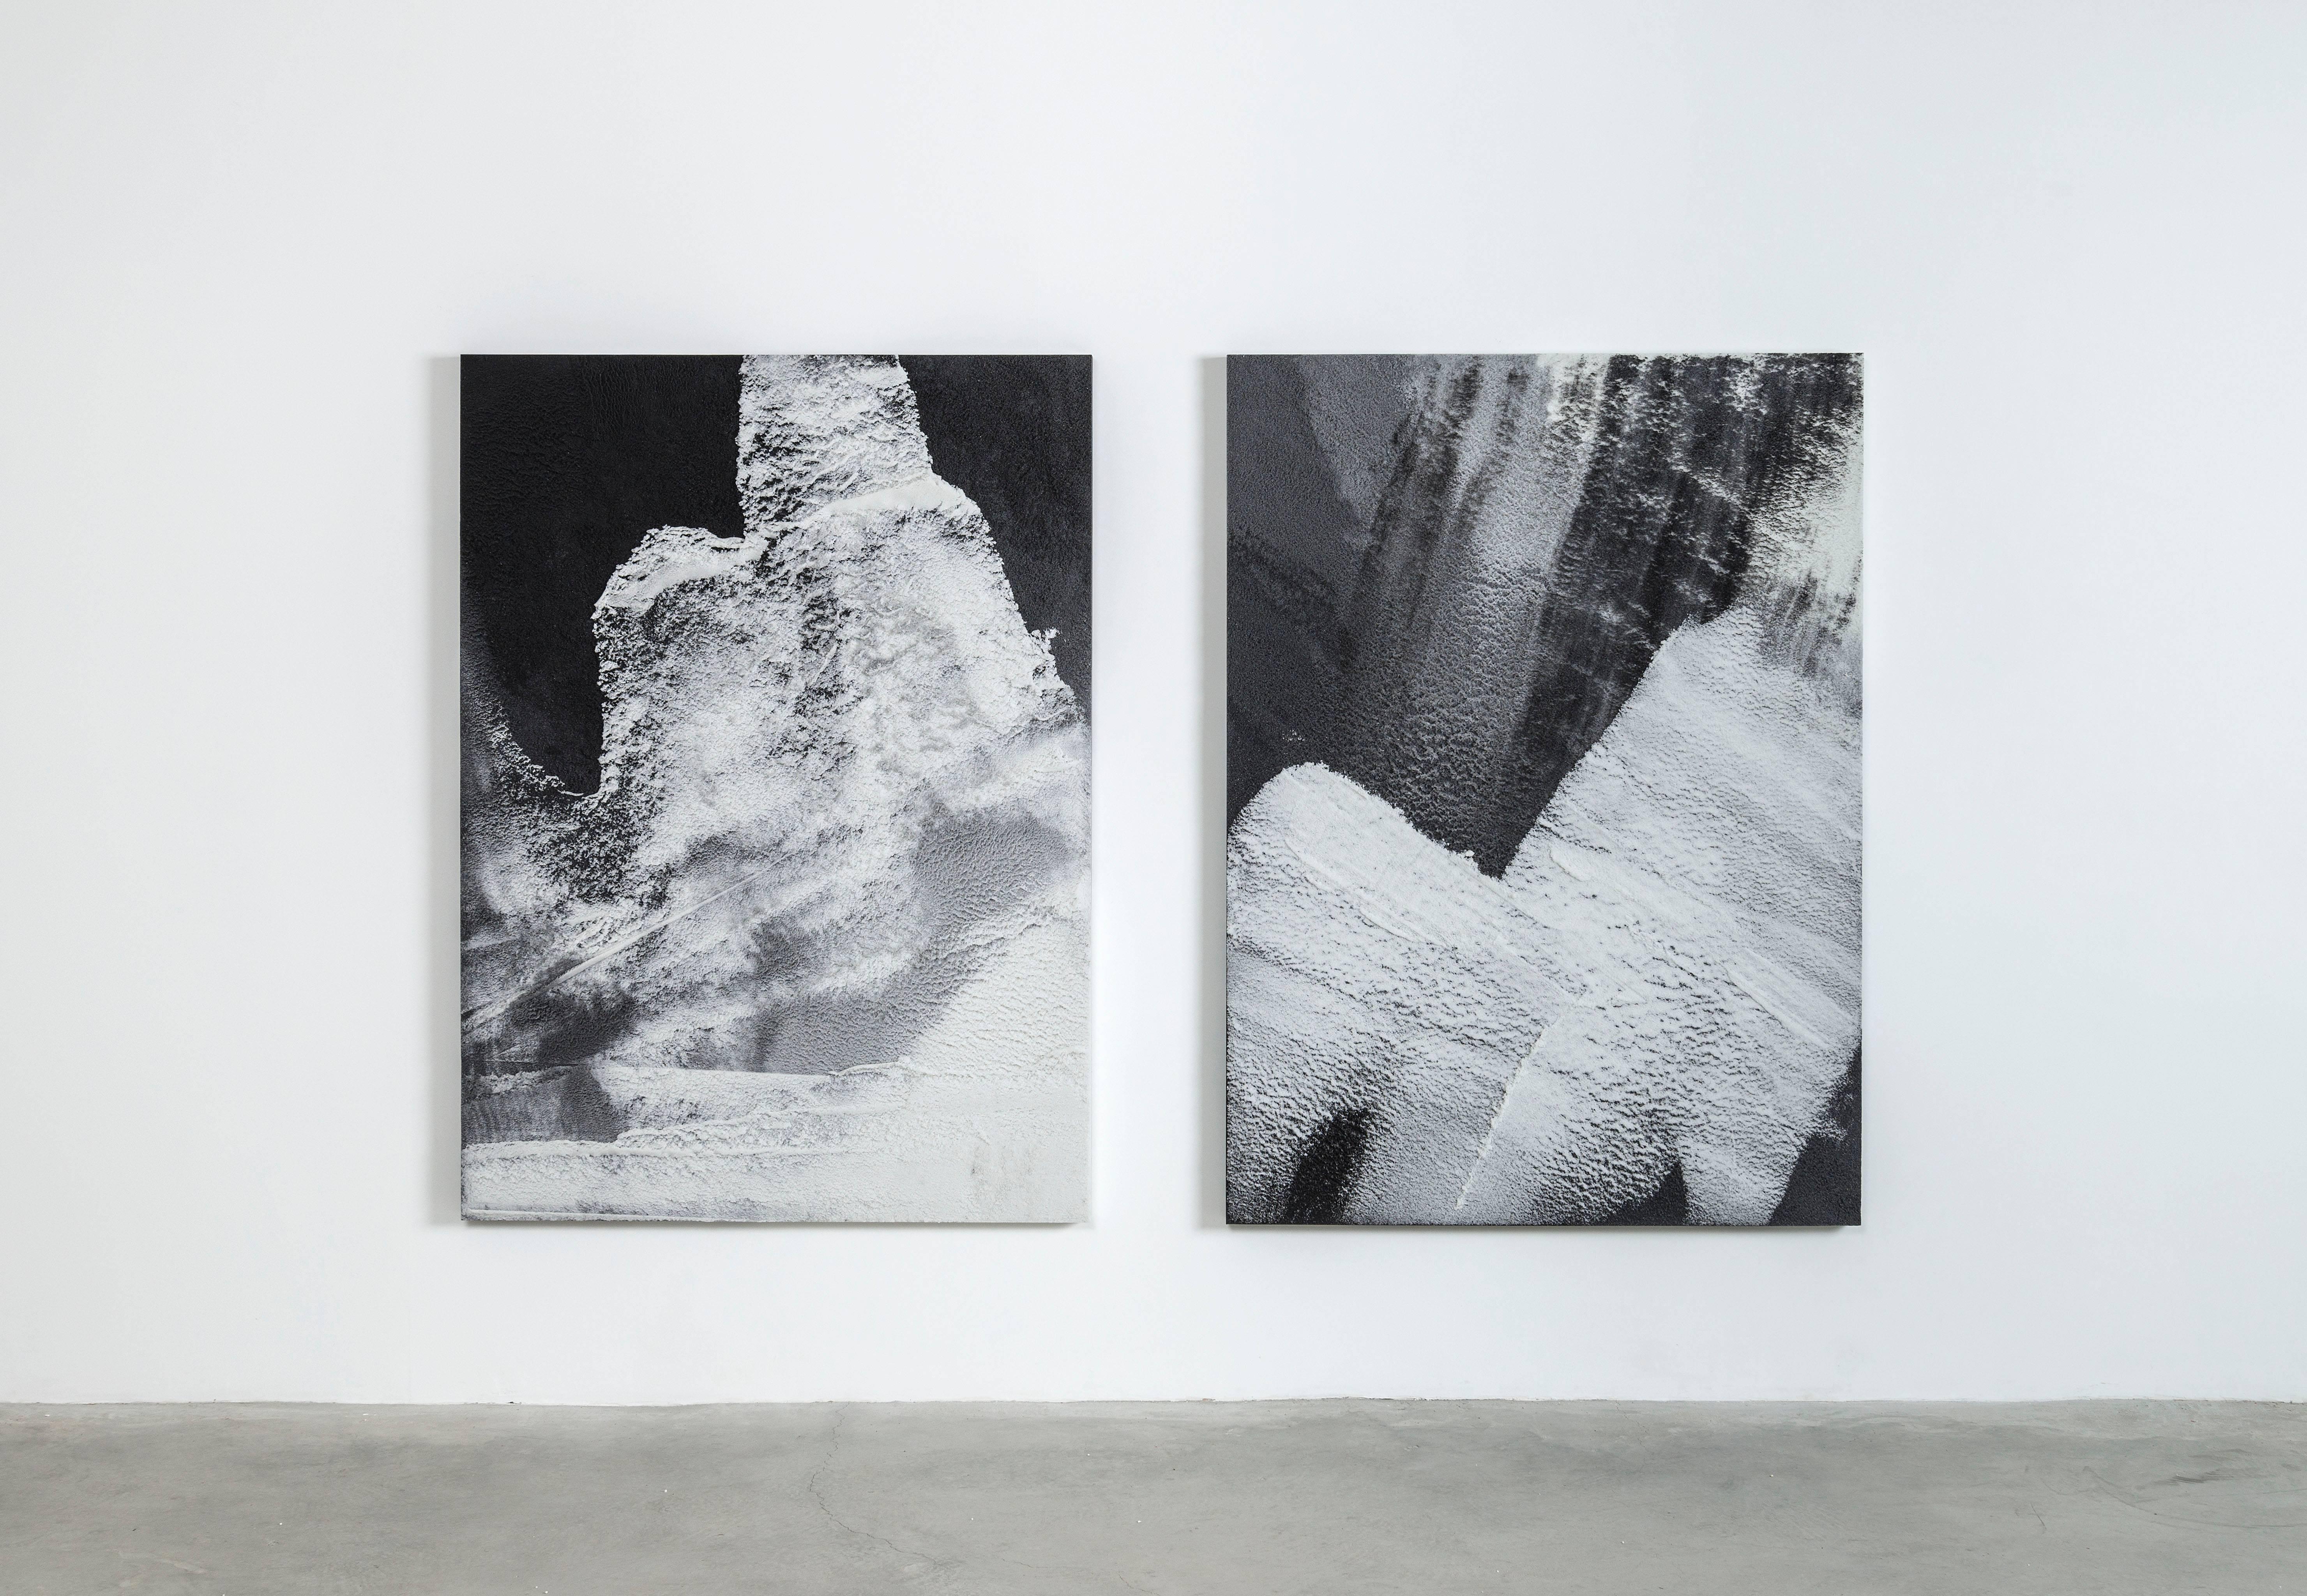 Composed in a language of landscape-oriented abstraction, the painting is made entirely from powdered glass. With hand-dyed granules in black and white tones, the materials create an effect evocative of aerial views of a rugged terrain.